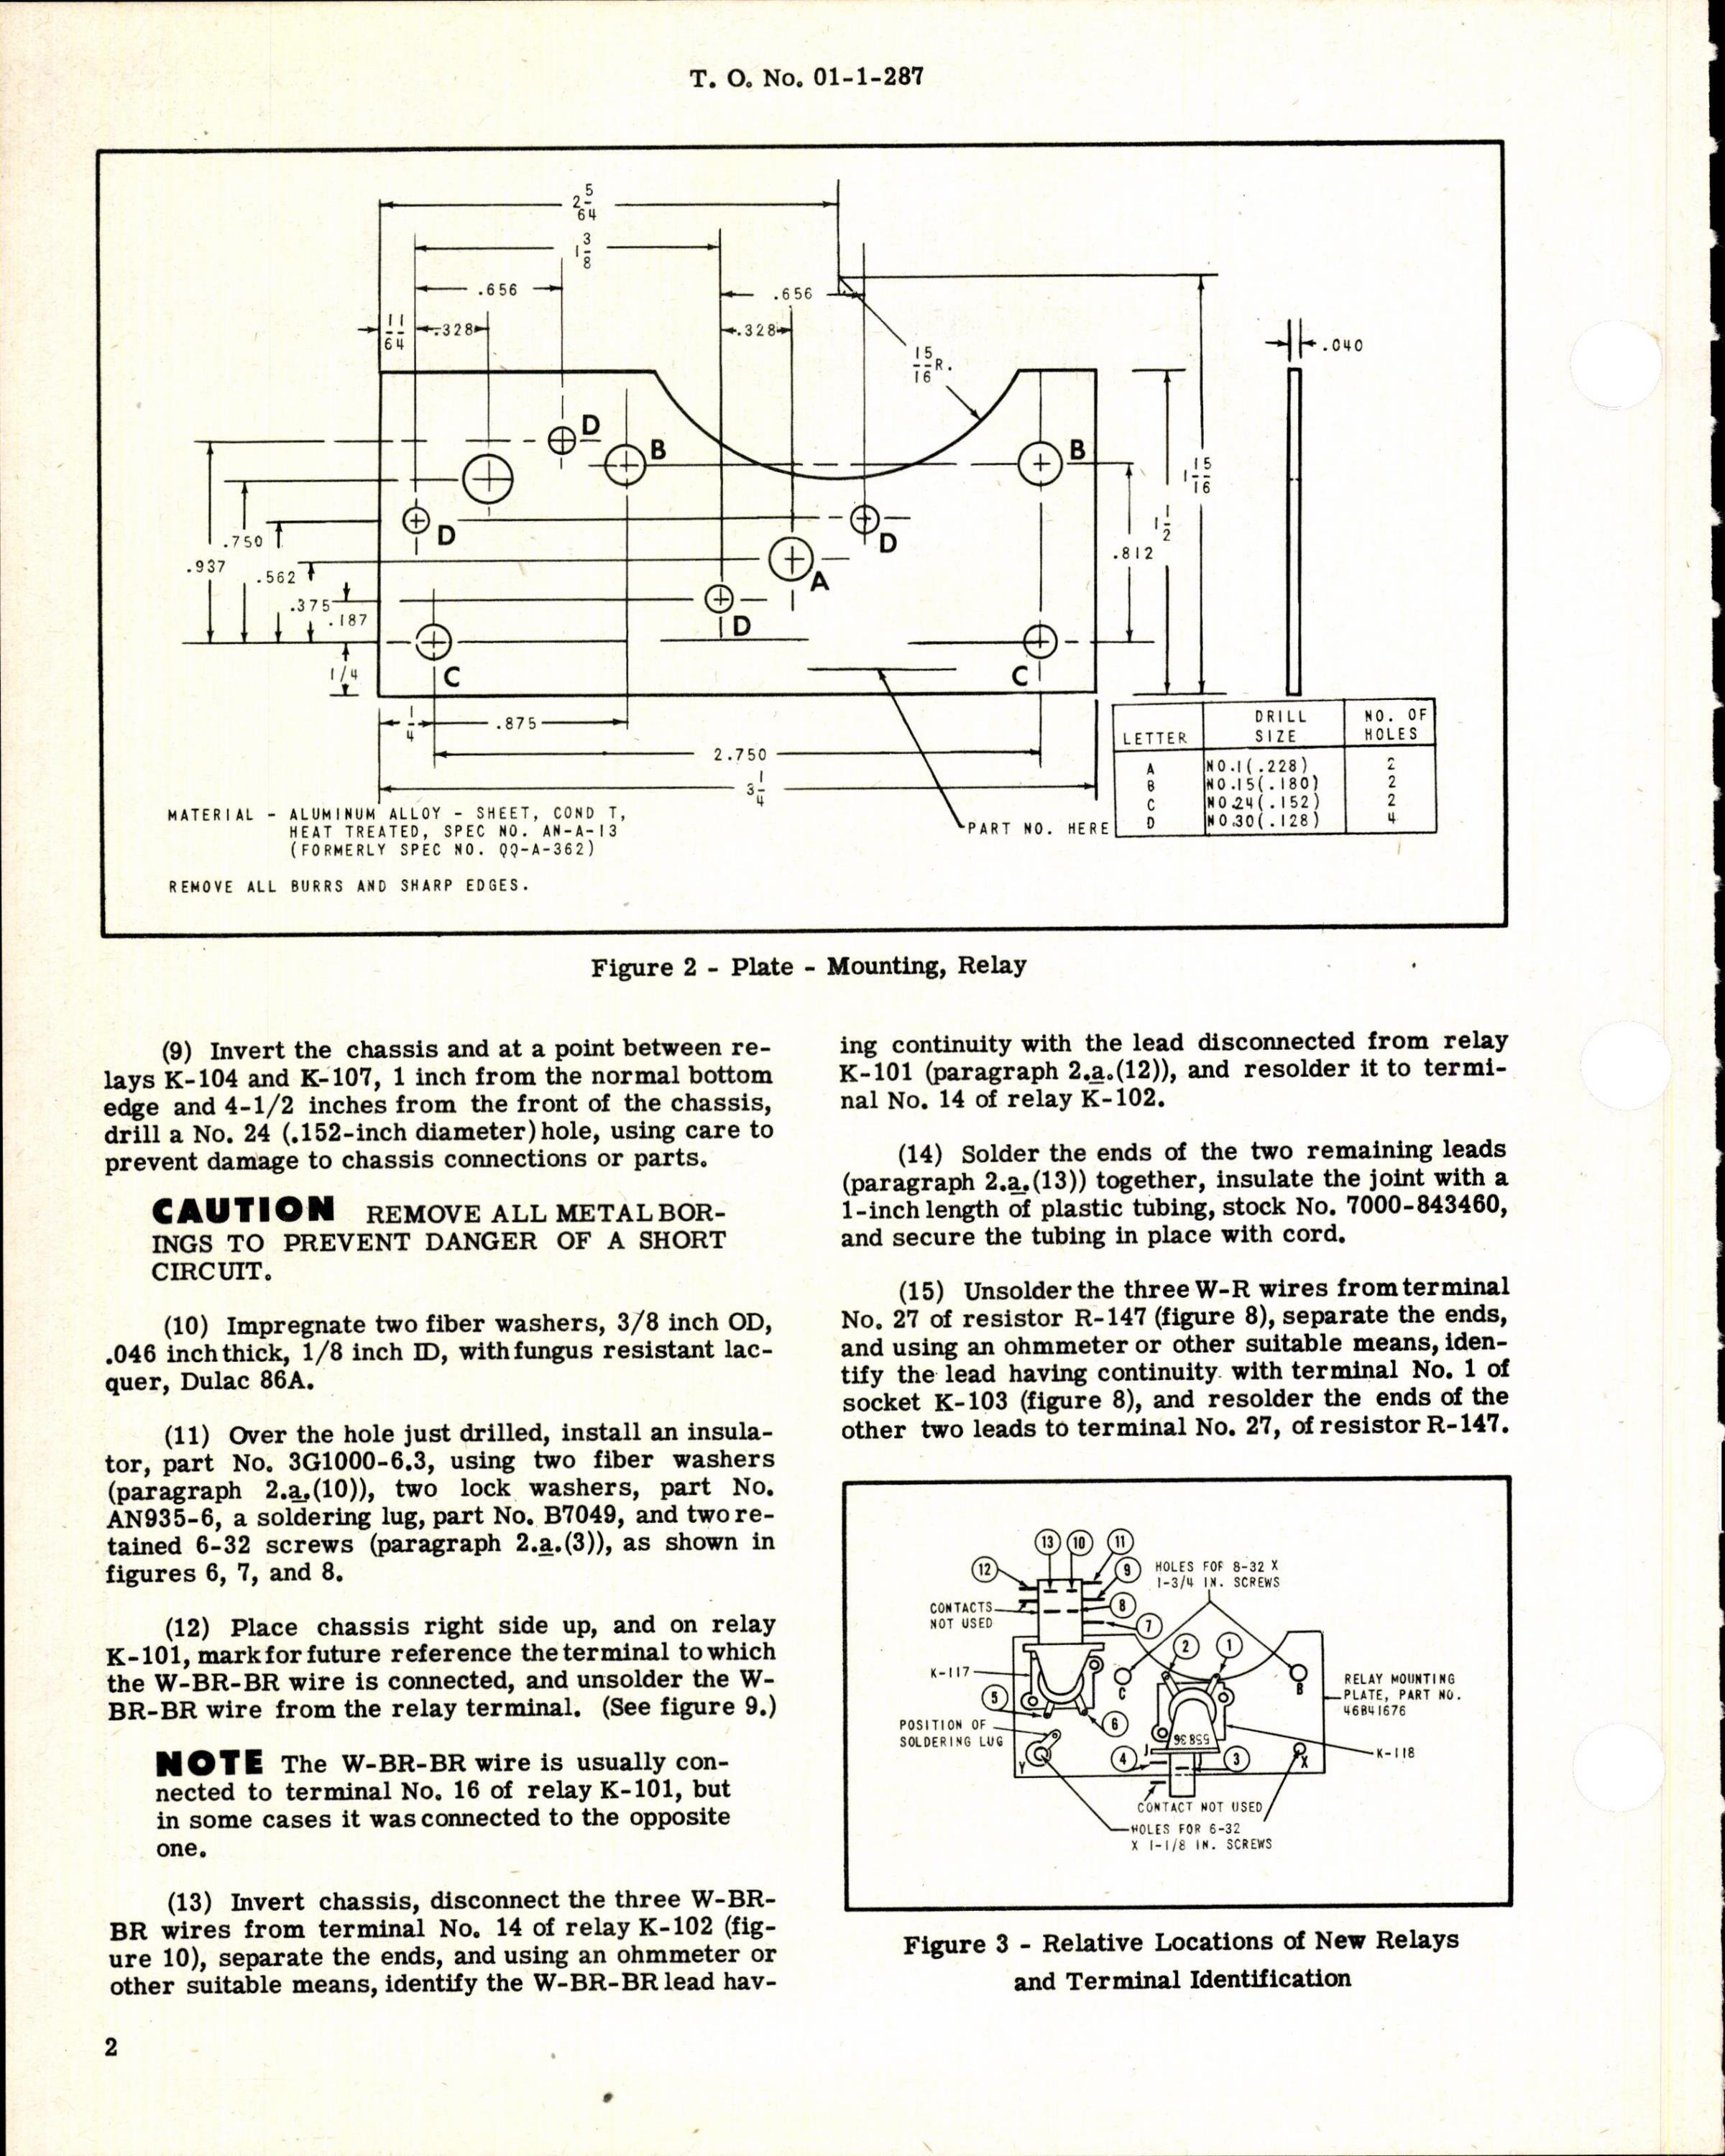 Sample page 2 from AirCorps Library document: Modification to Reduce Likelihood of Continuous Operation of AN/ARC-3 Tuning Motor